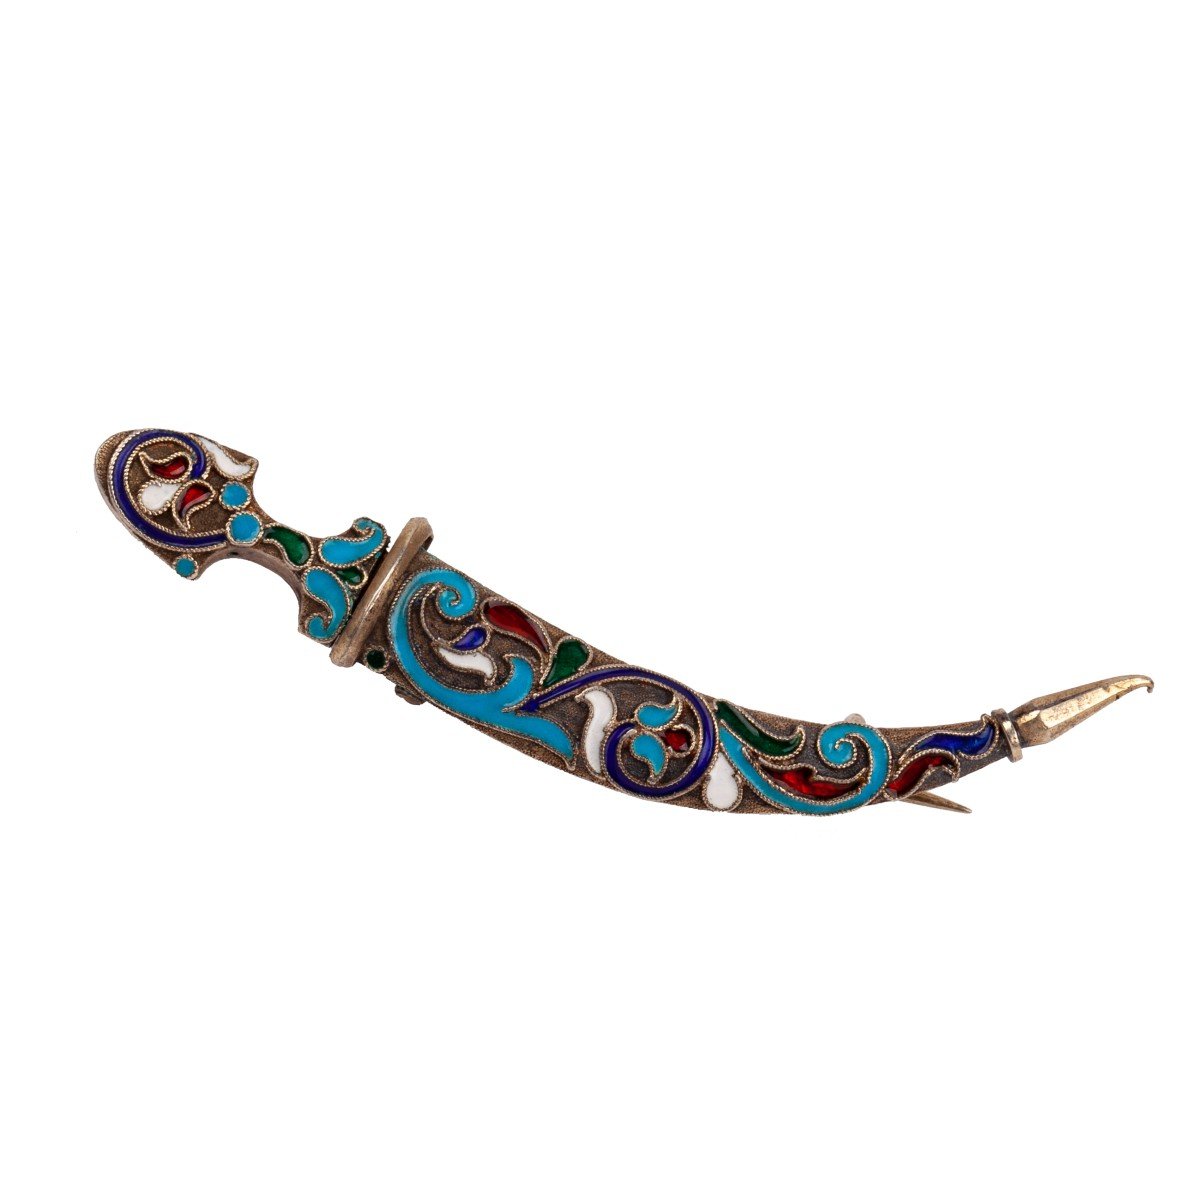 A Silver And Cloisonné Enamel Brooch From The Russian Imperial Period In The Shape Of A Kindjal.